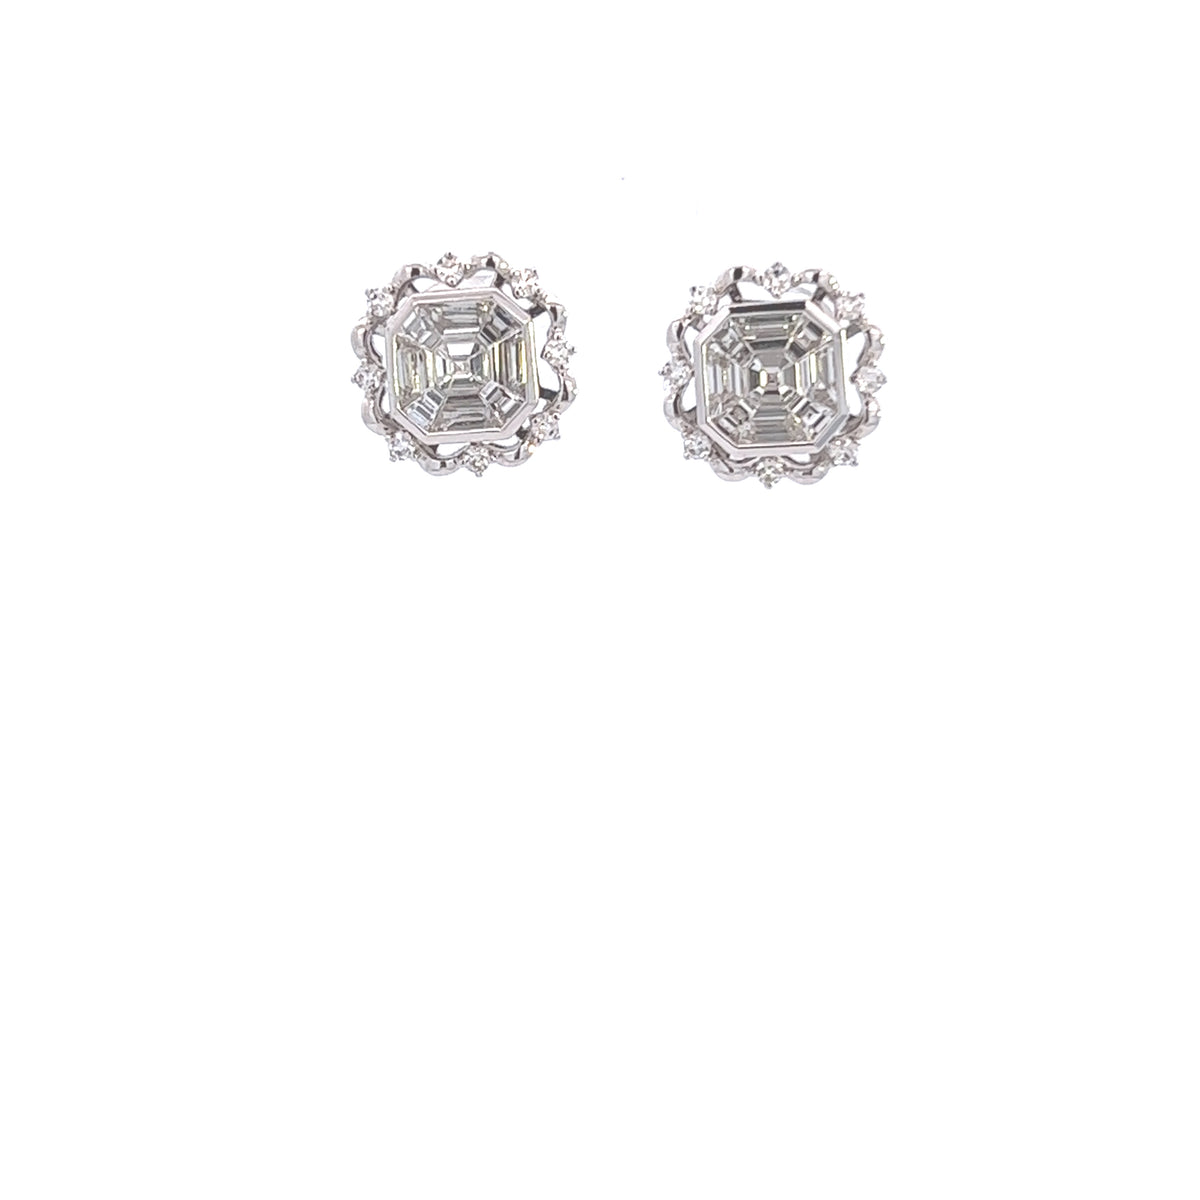 18K White Gold Floral Diamond Earrings with Emerald Cuts